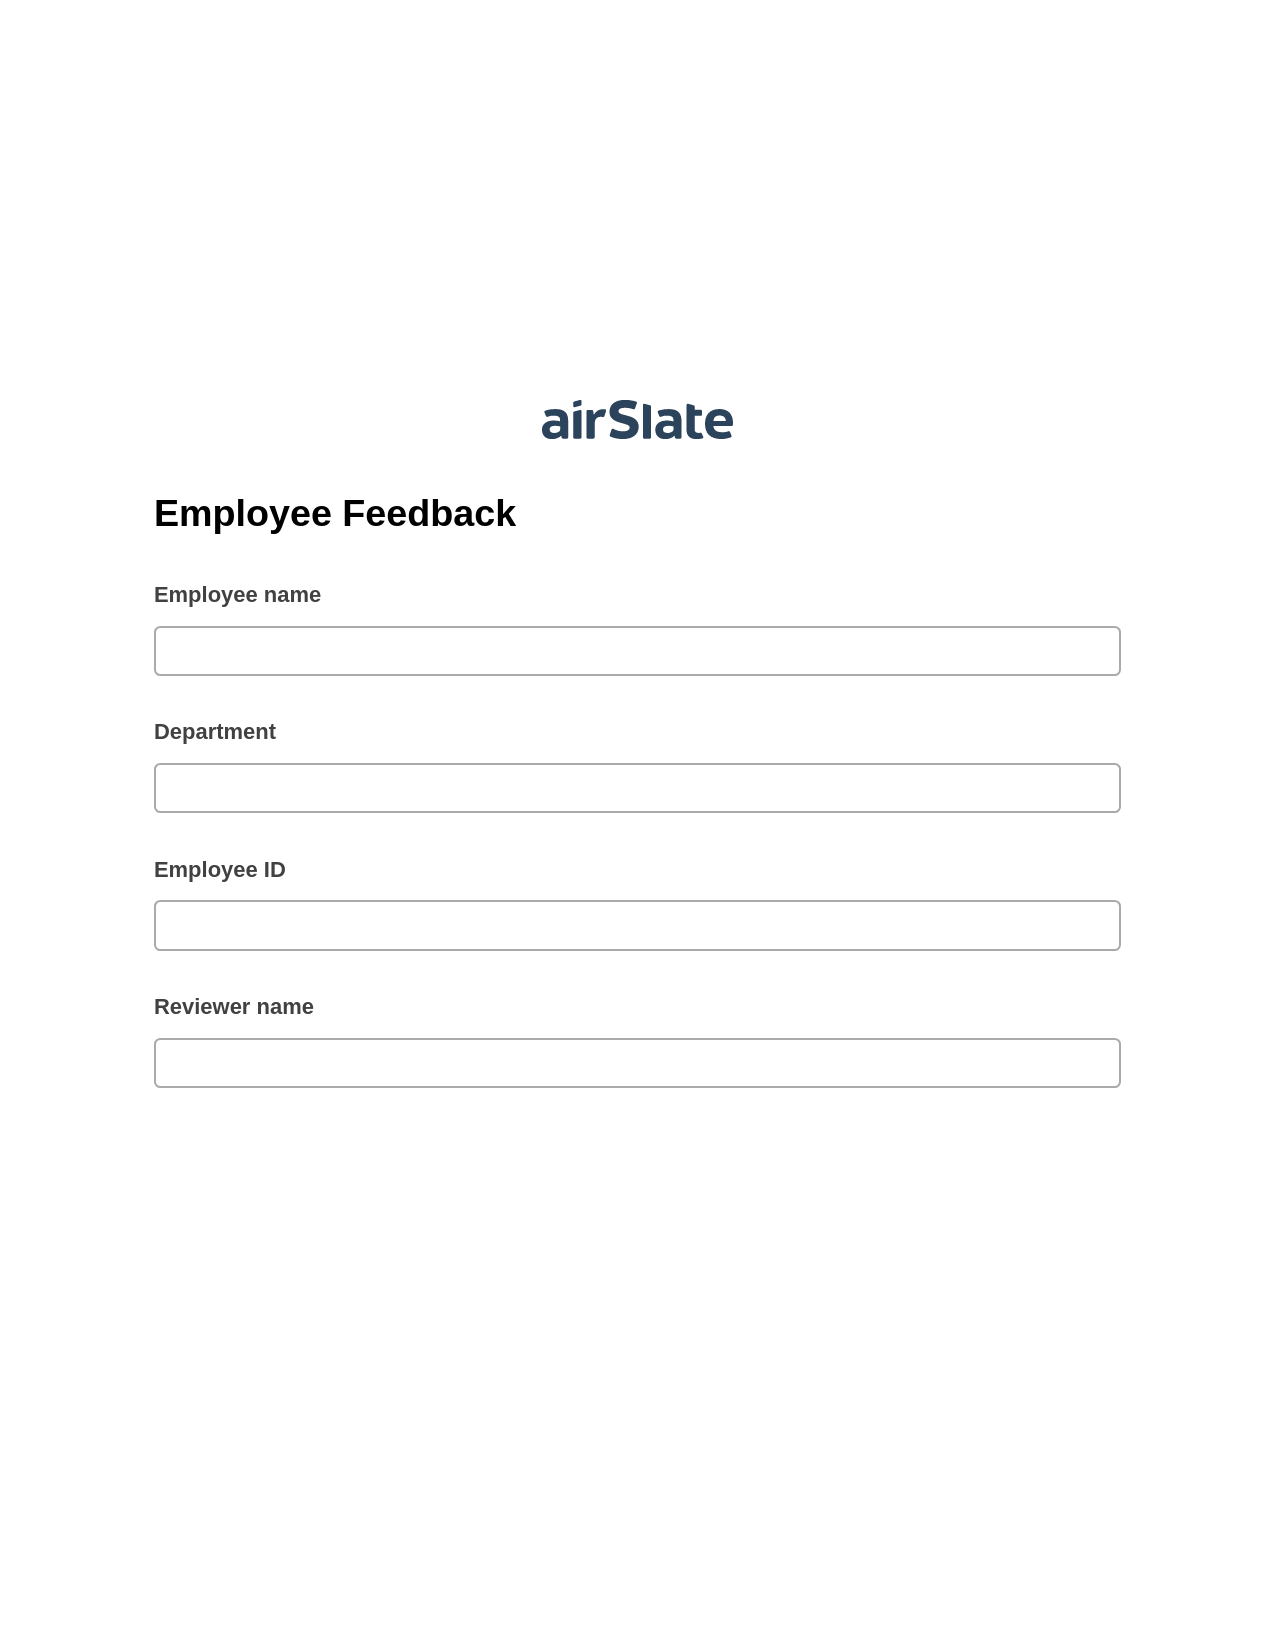 Multirole Employee Feedback Pre-fill from CSV File Dropdown Options Bot, Remove Slate Bot, Archive to SharePoint Folder Bot